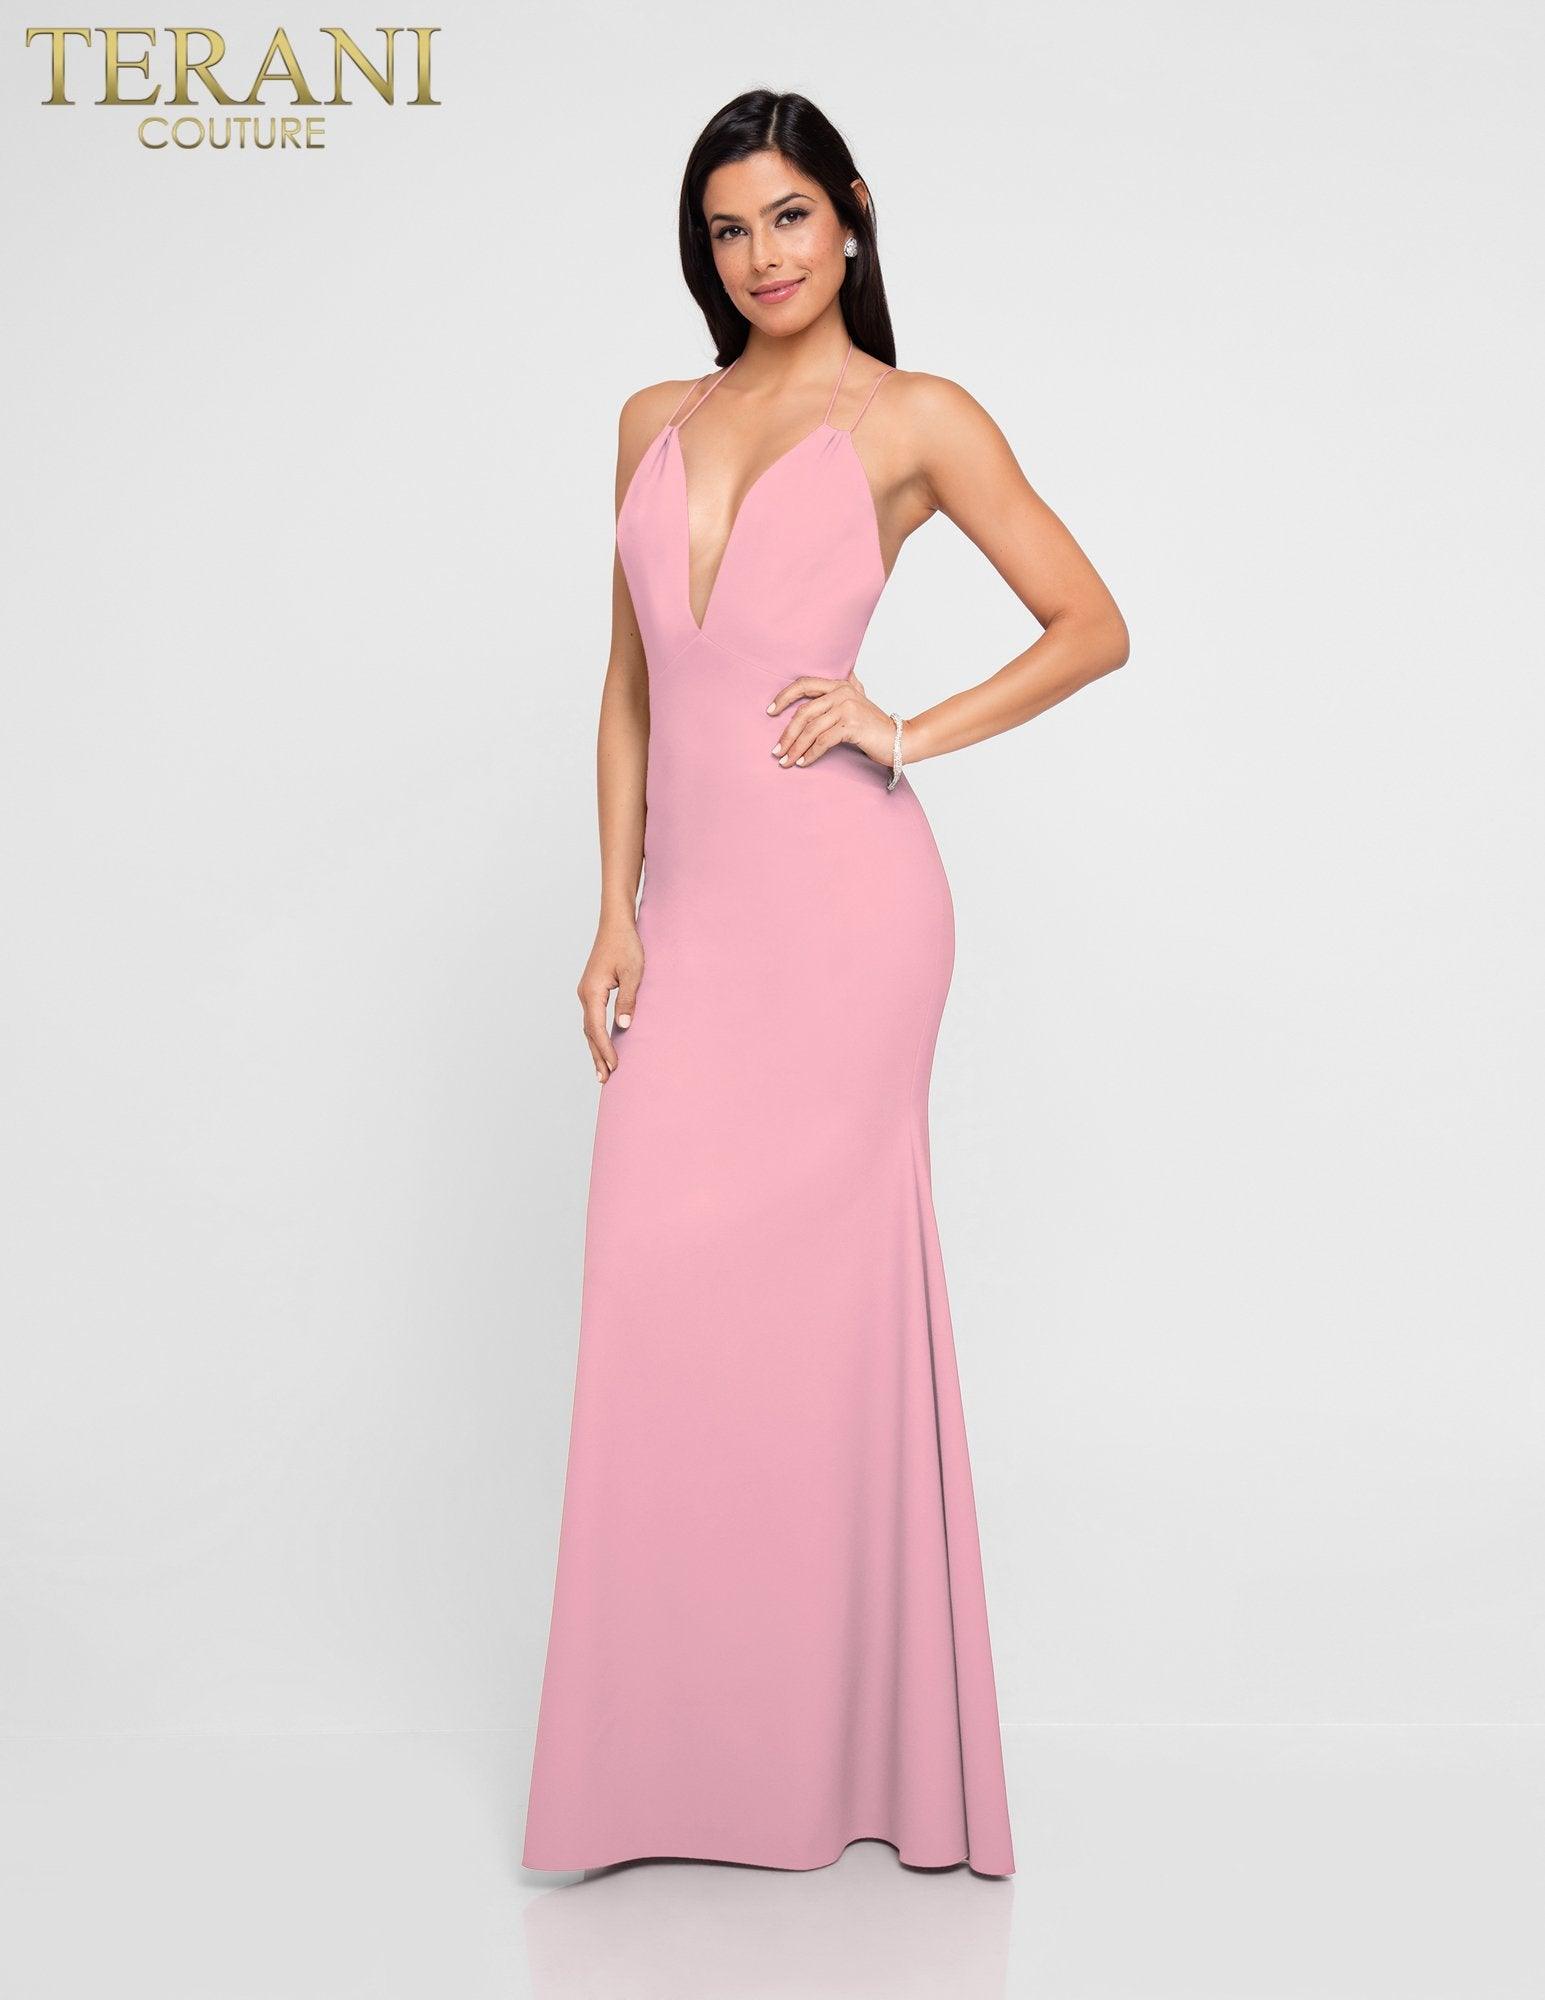 Terani Couture Long Formal Bridesmaid Dress 1812B5423 - The Dress Outlet